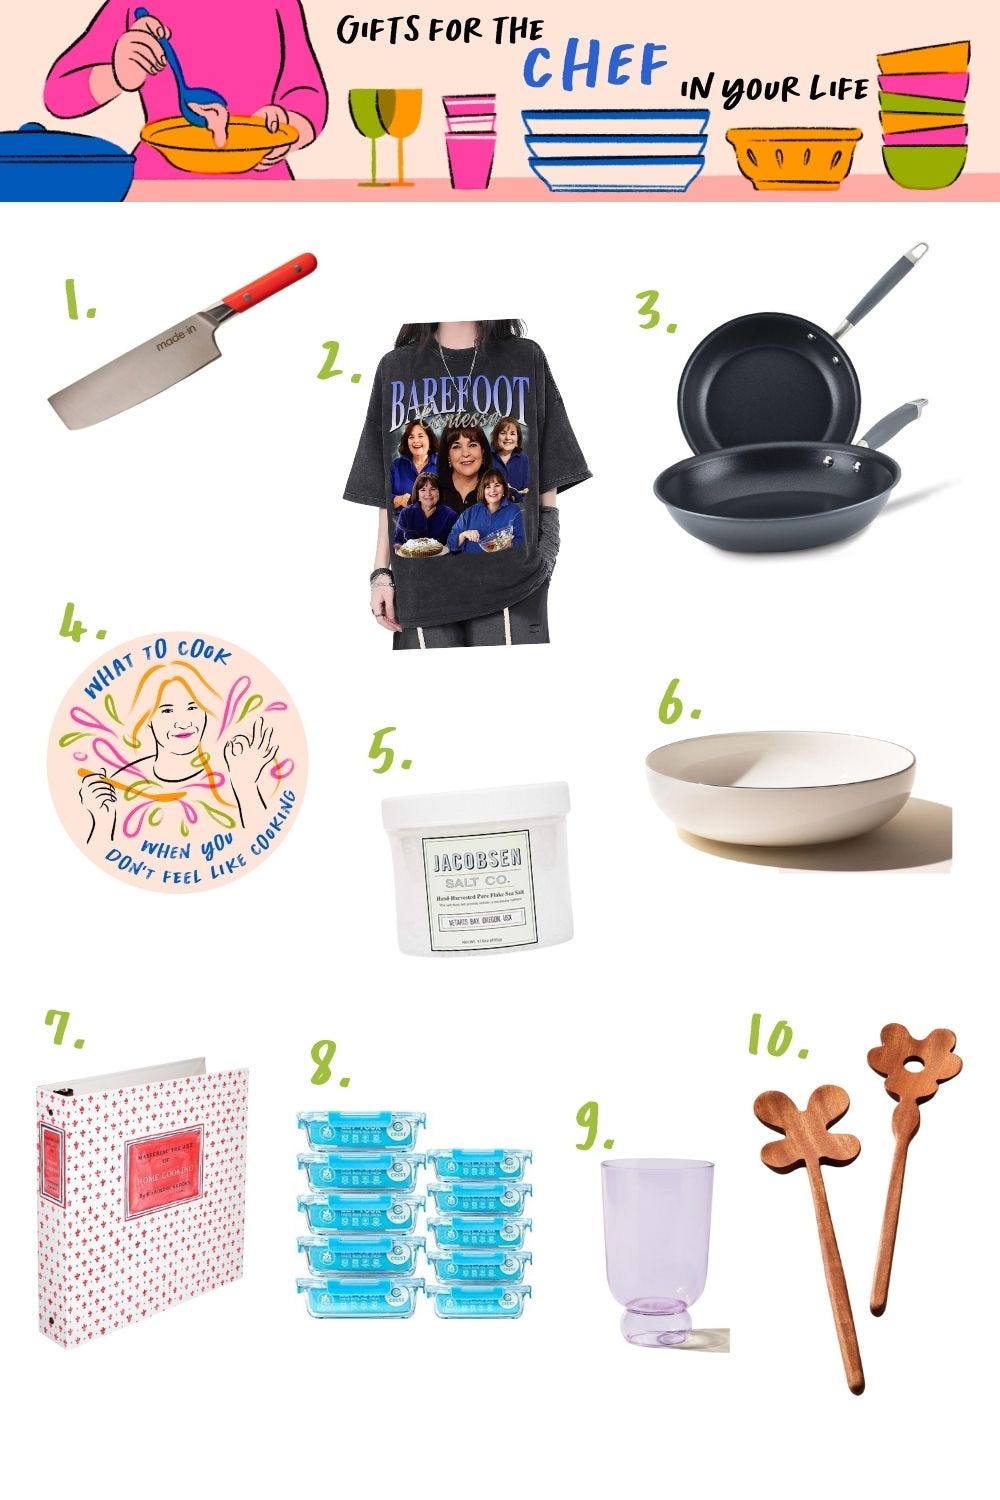 My Favorite Pampered Chef Products You'll Love Too